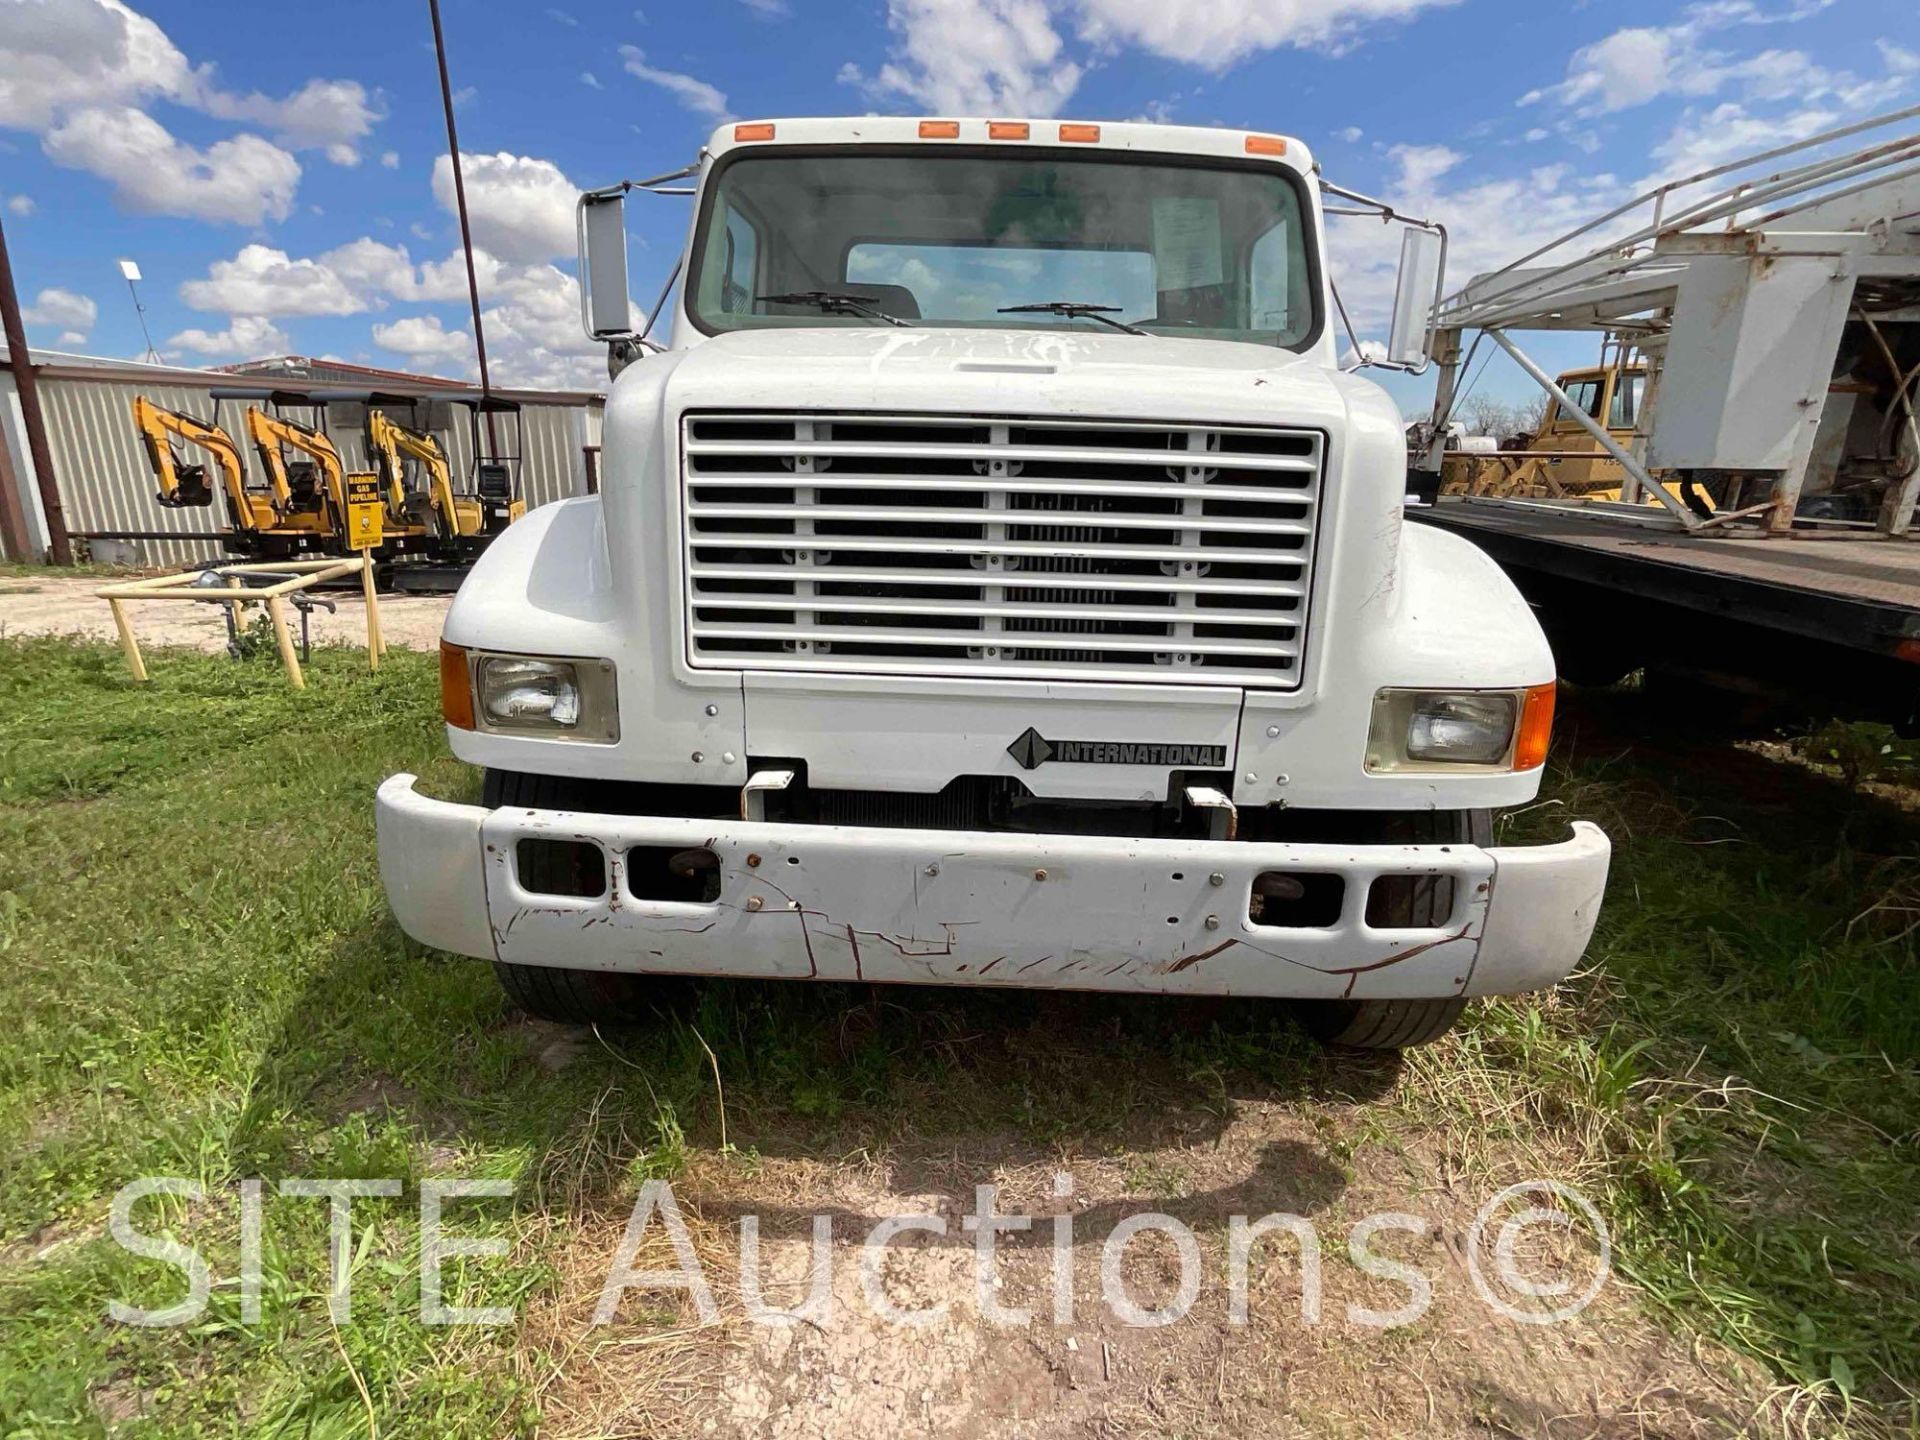 1998 InternationaL 4900 S/A Flatbed Truck w/ Ramps - Image 4 of 27